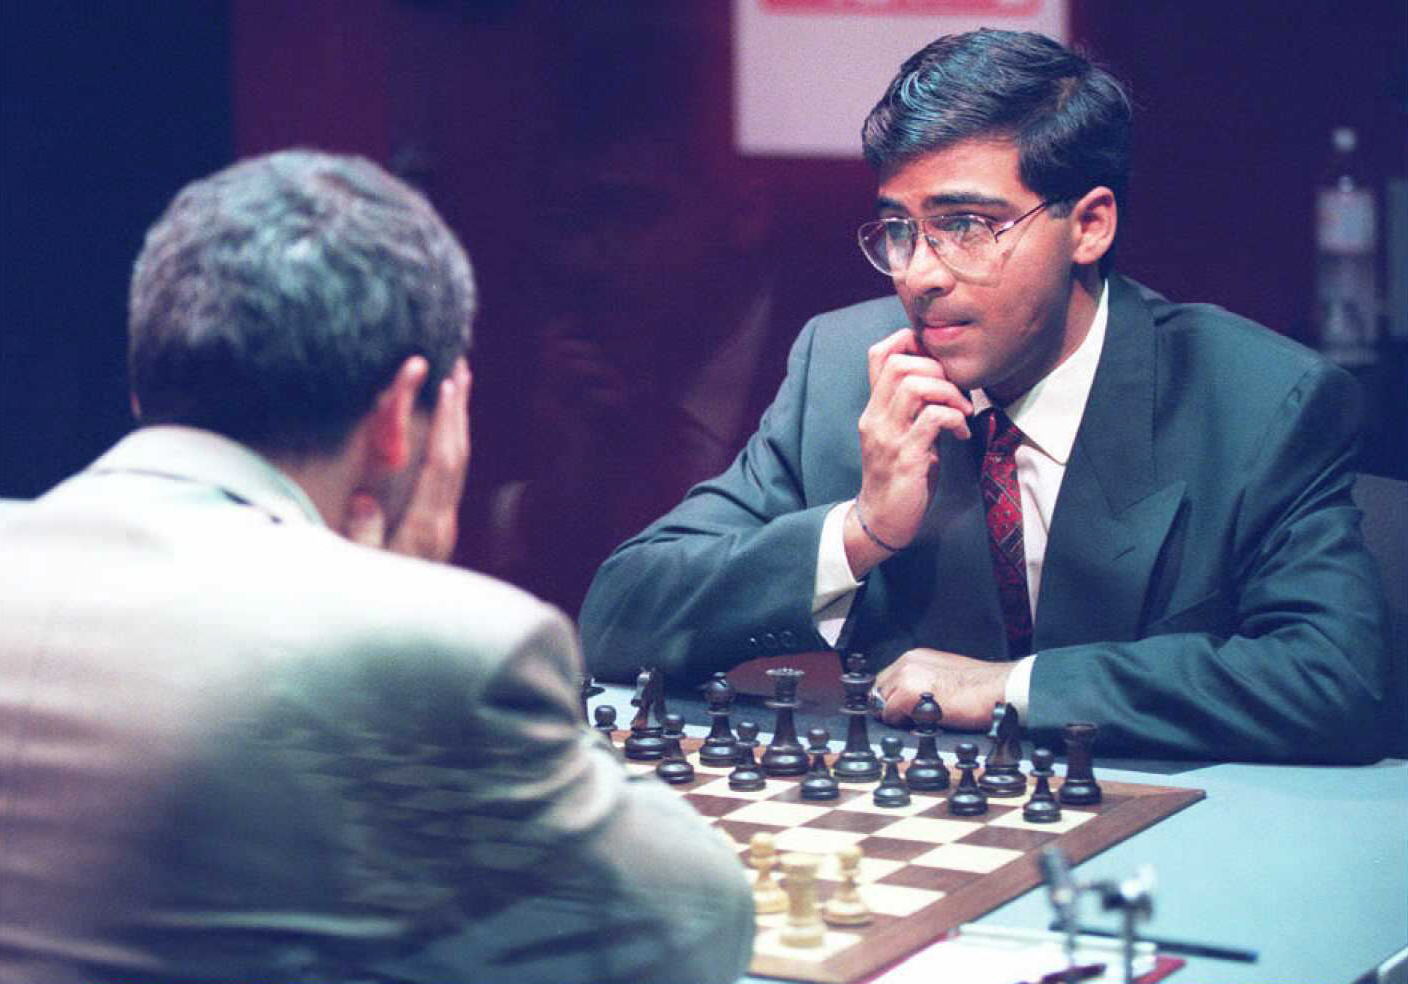 Best Chess Games: Anand Defeats Kasparov in the World Championship